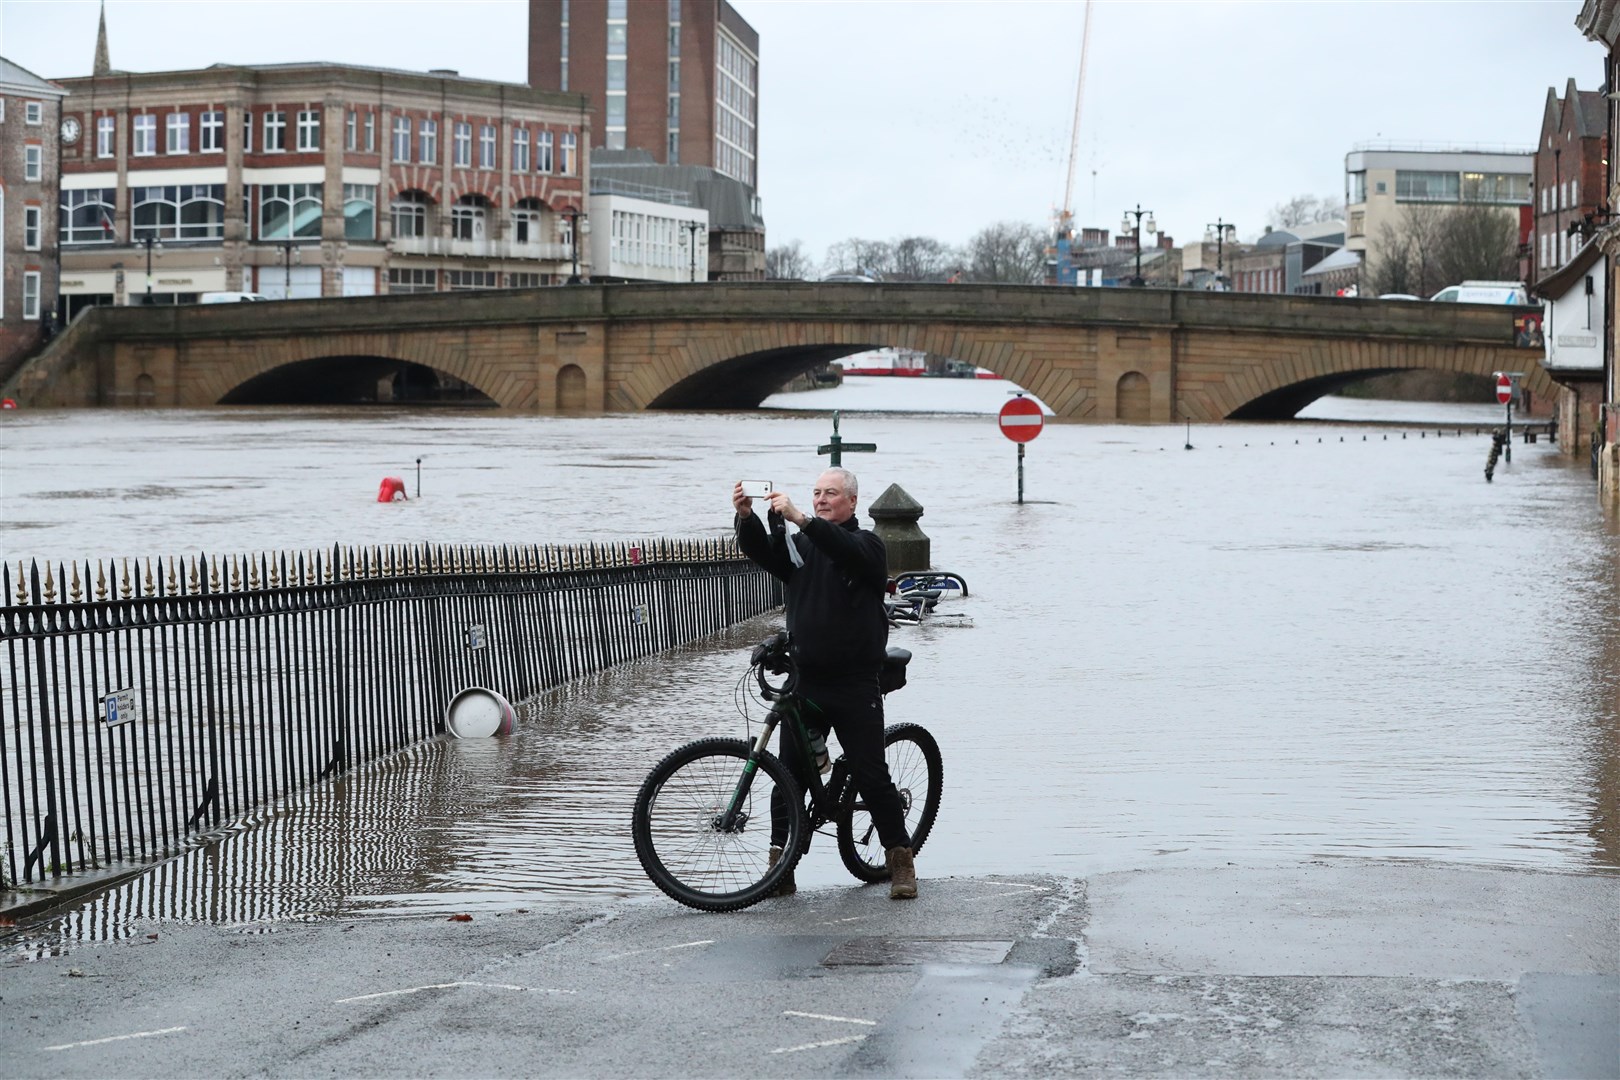 A man on a bicycle taking a photograph in front of floodwaters in York (Danny Lawson/PA)